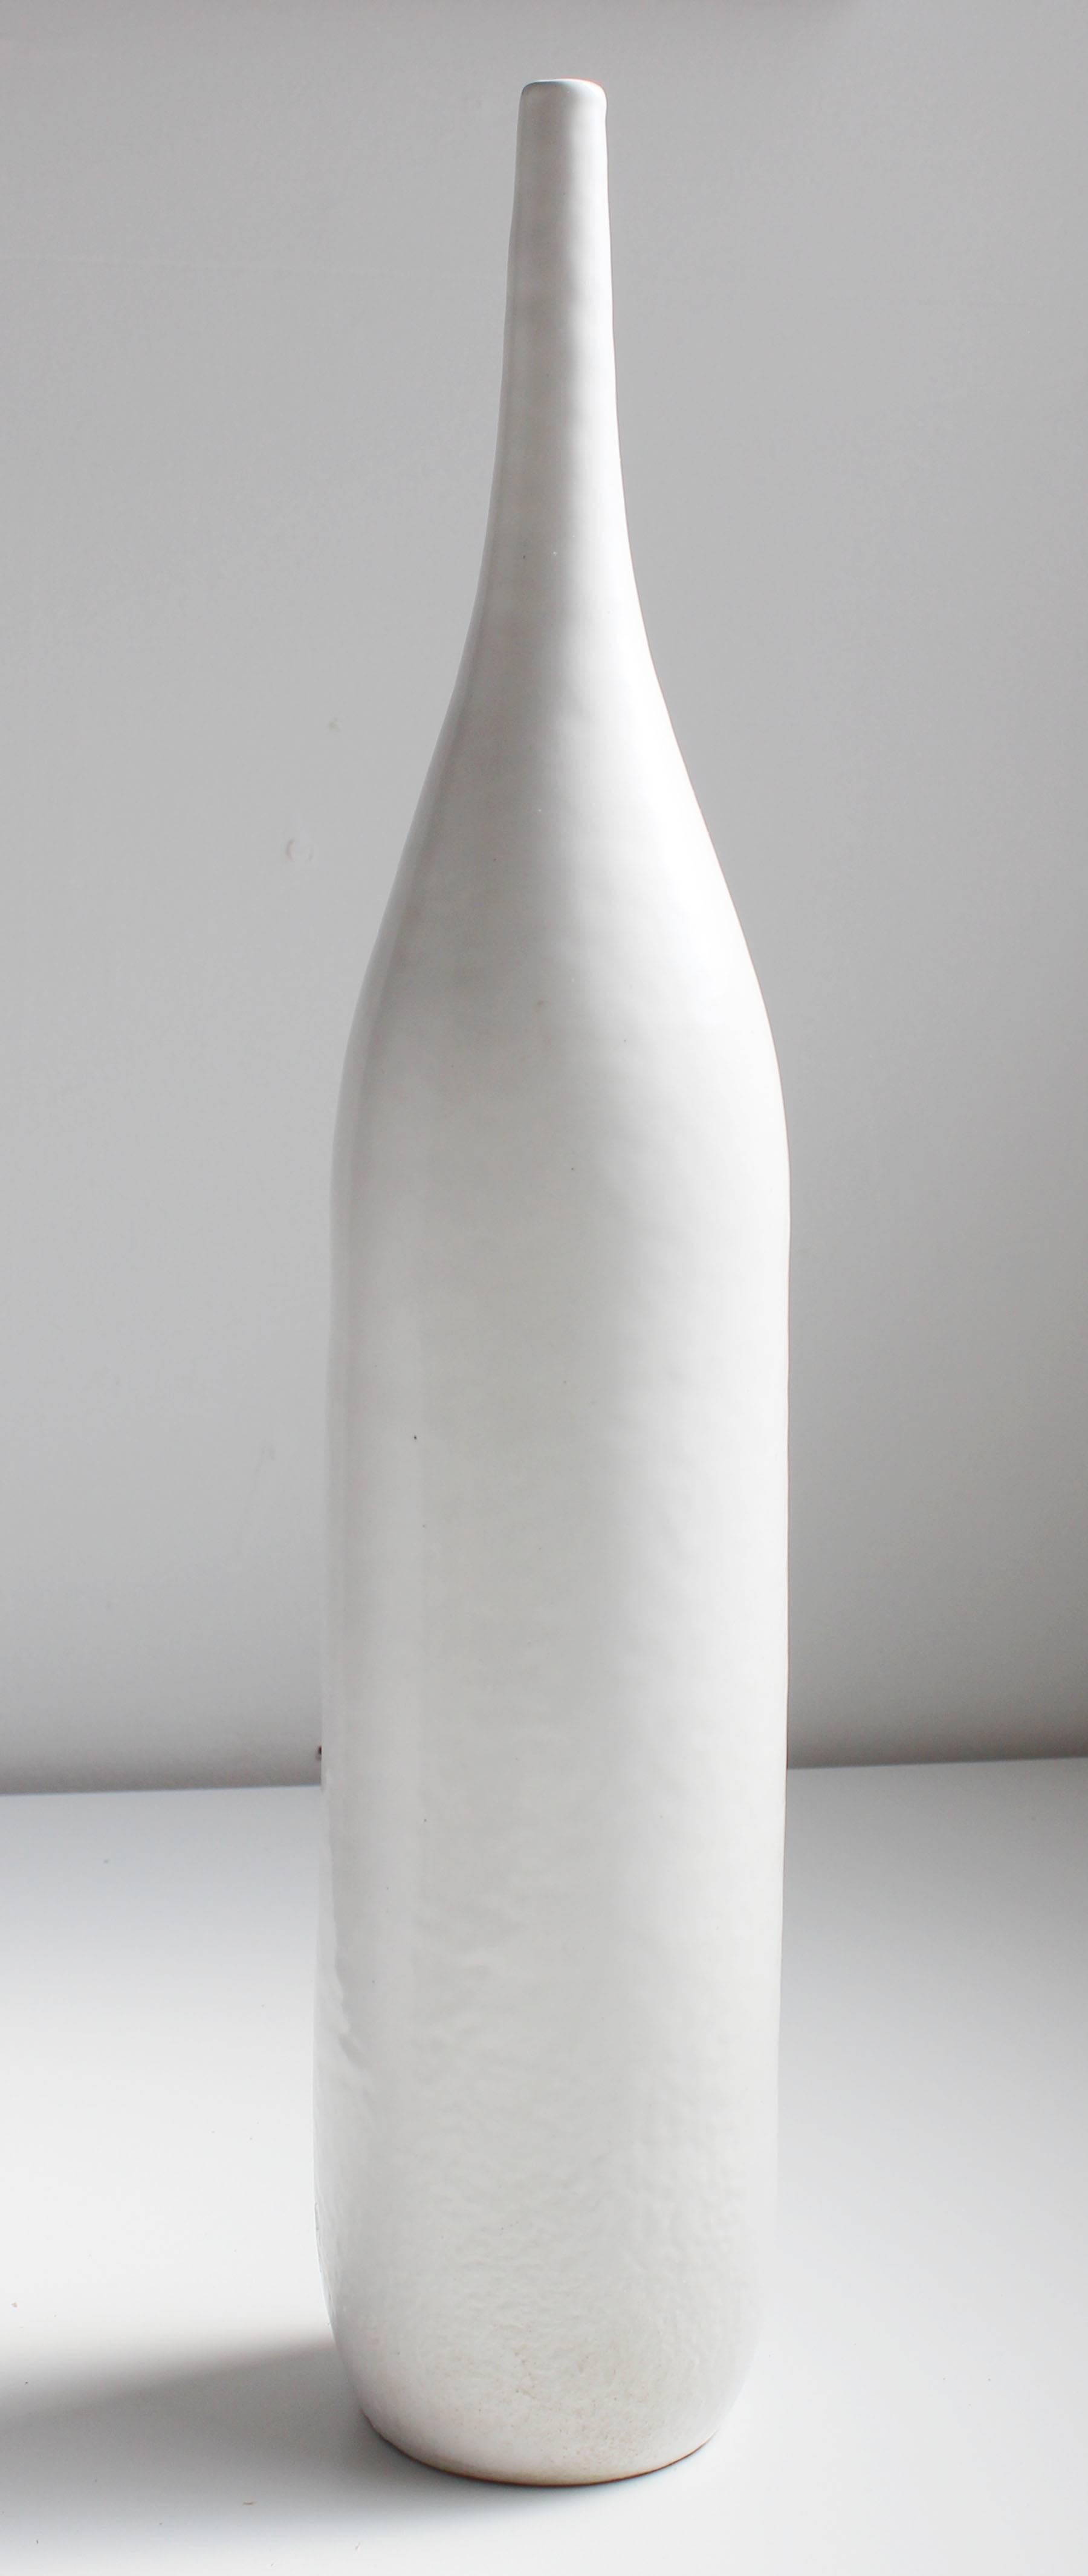 An earthy smooth to rough white glazed terra cotta bottle vase by Raymor Italy.